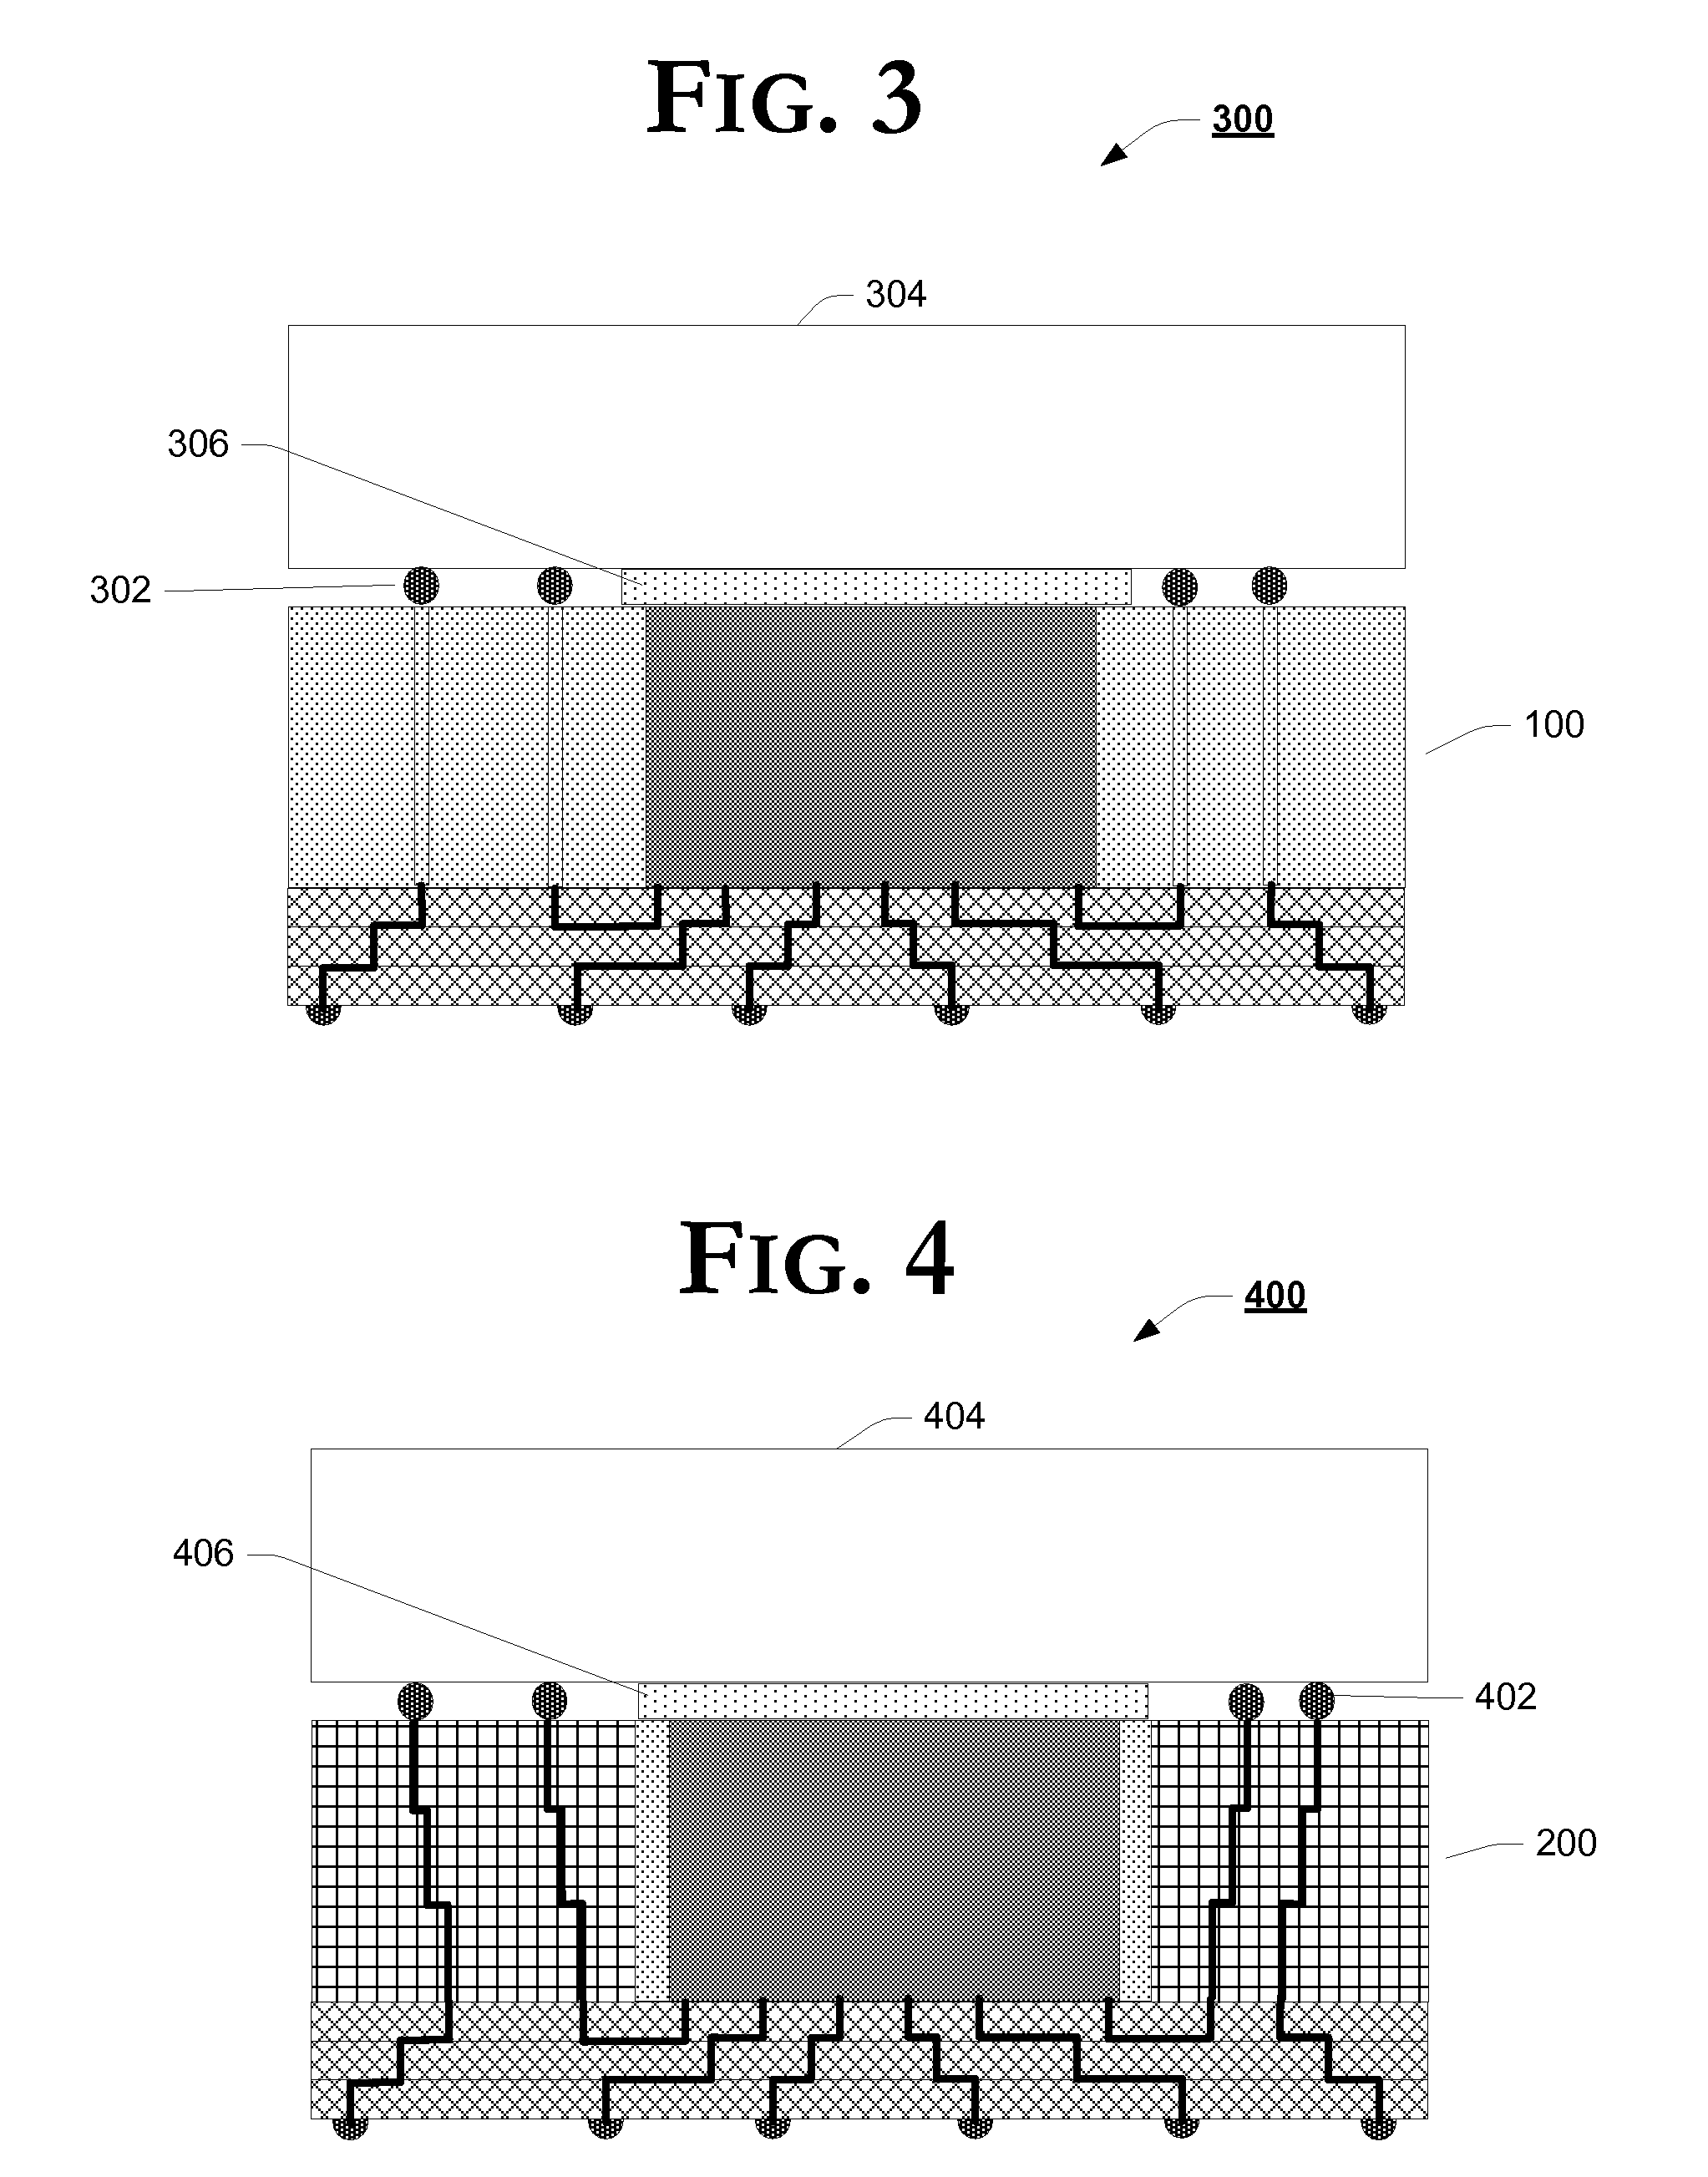 Package on package using a bump-less build up layer (BBUL) package